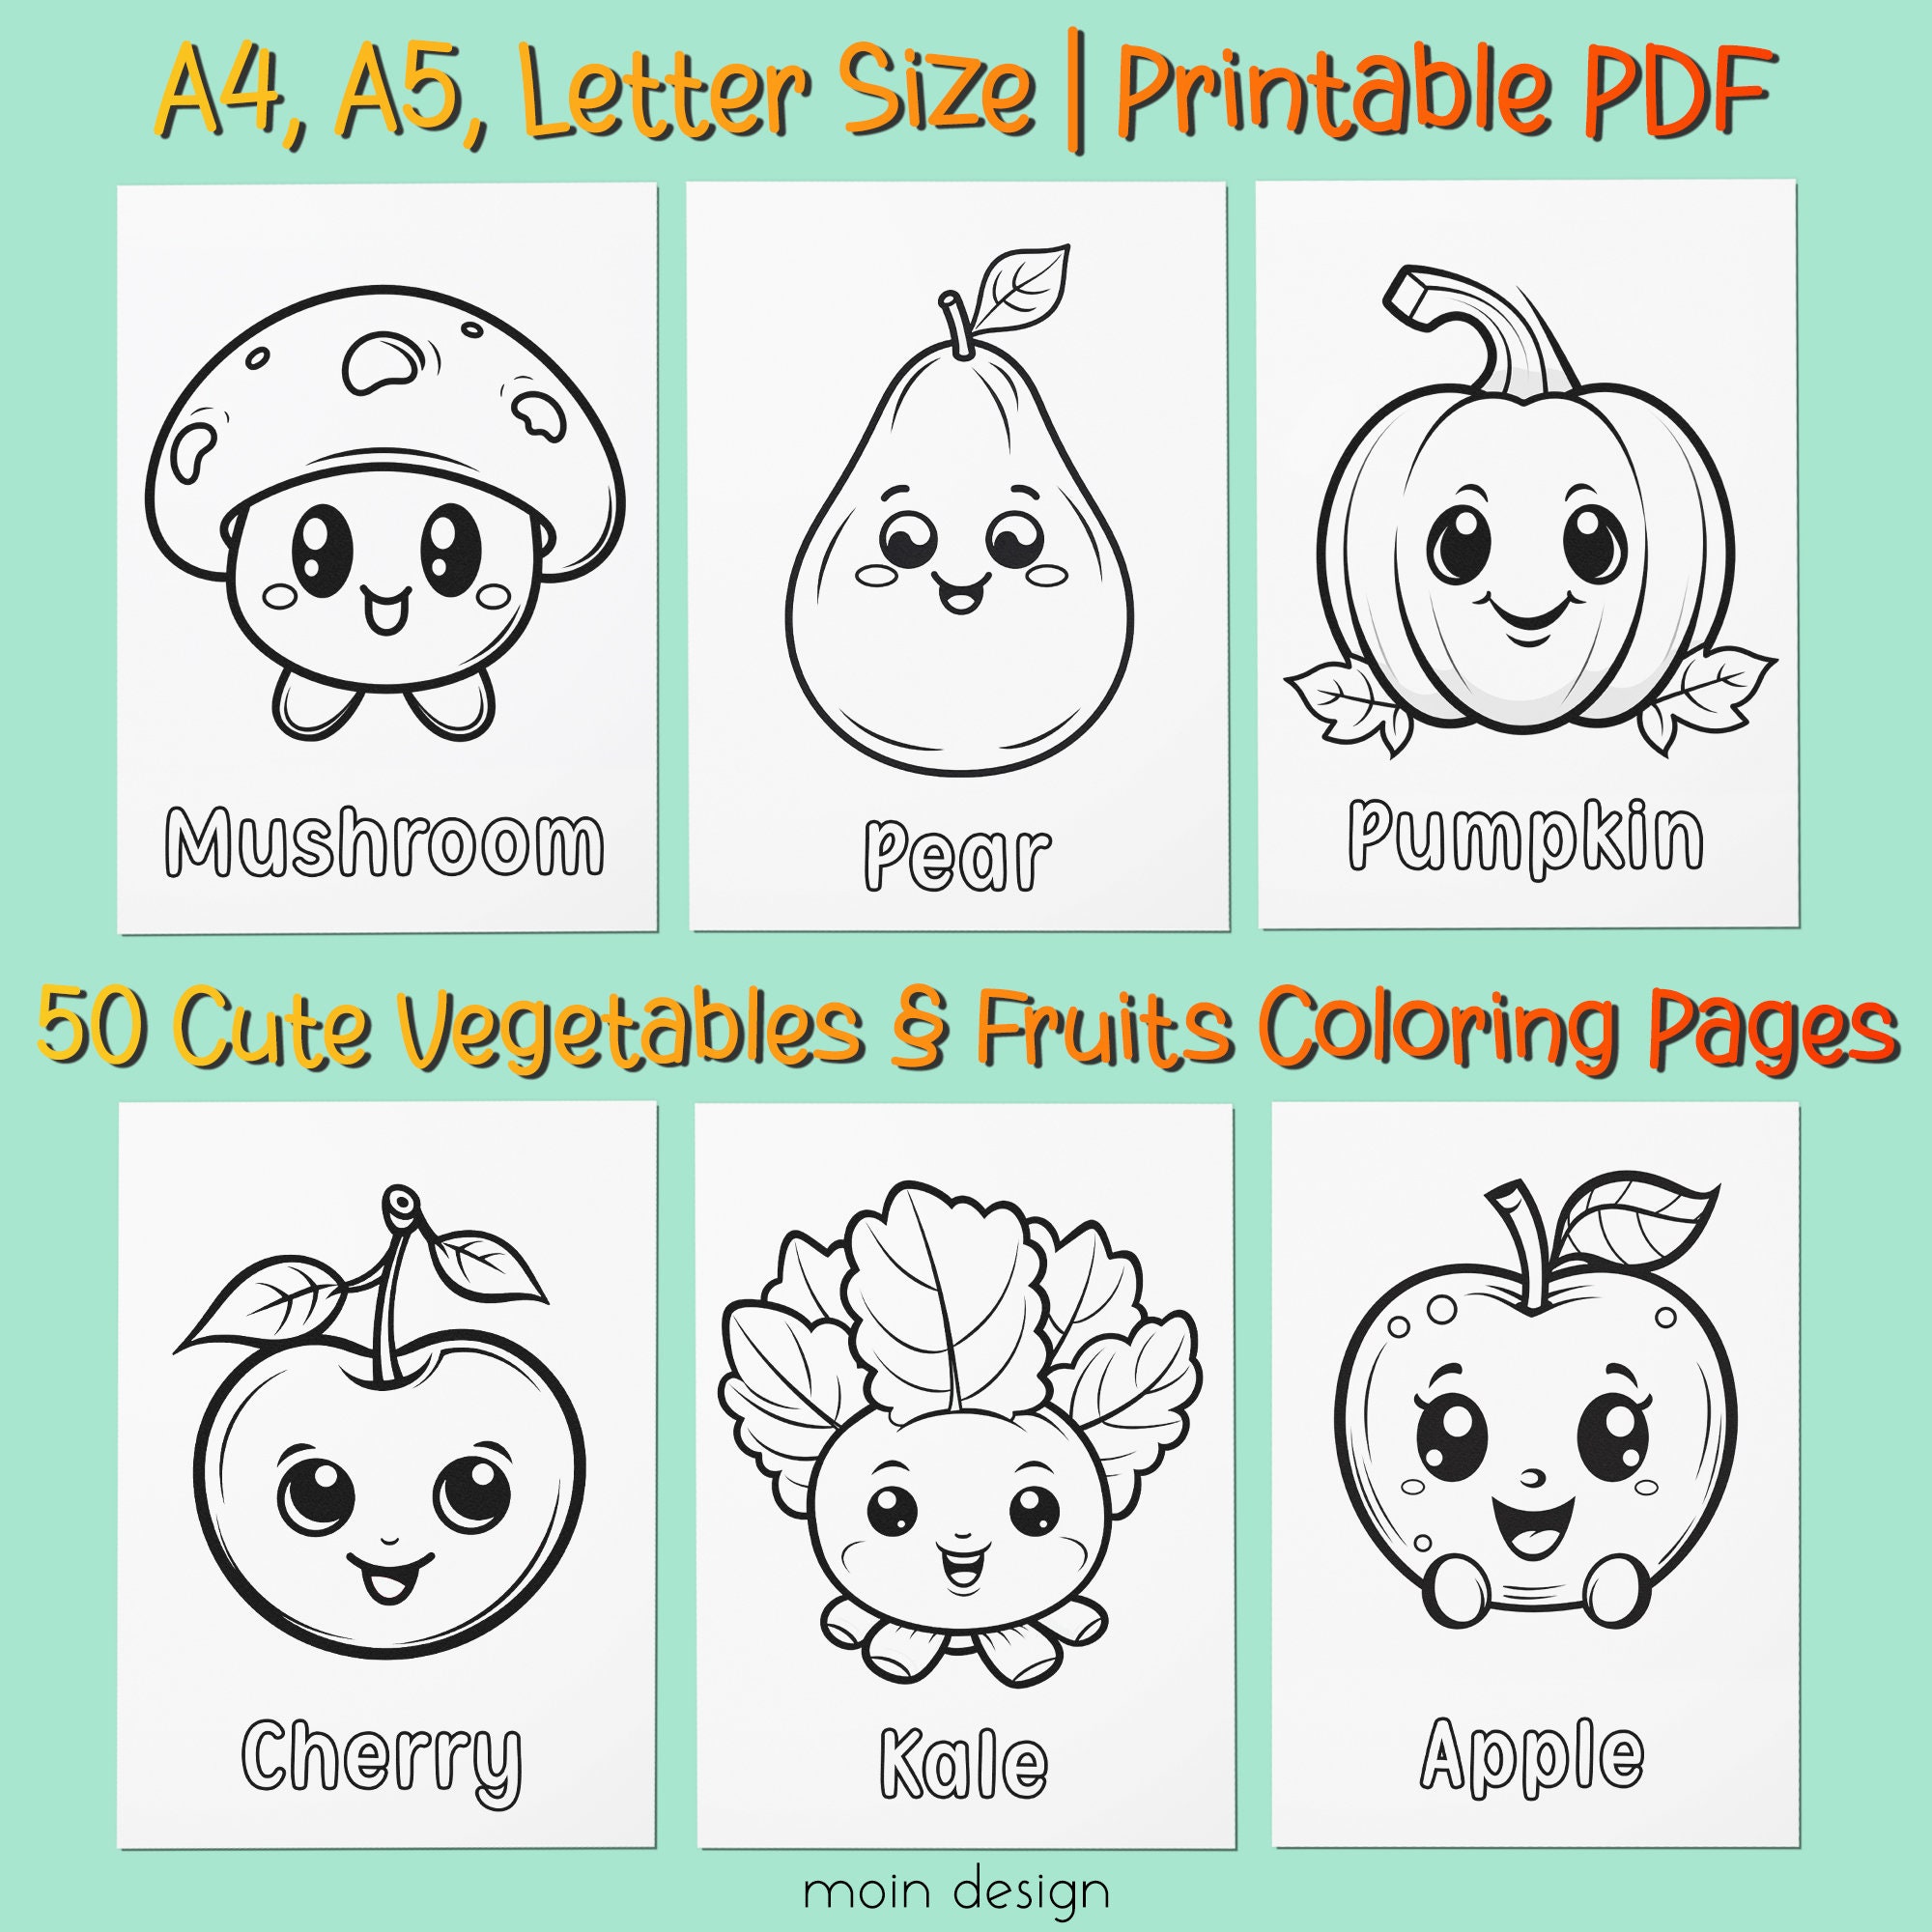 Printable vegetables and fruits coloring sheets coloring pages for kids preschool activities improve motor skills instant download pdf